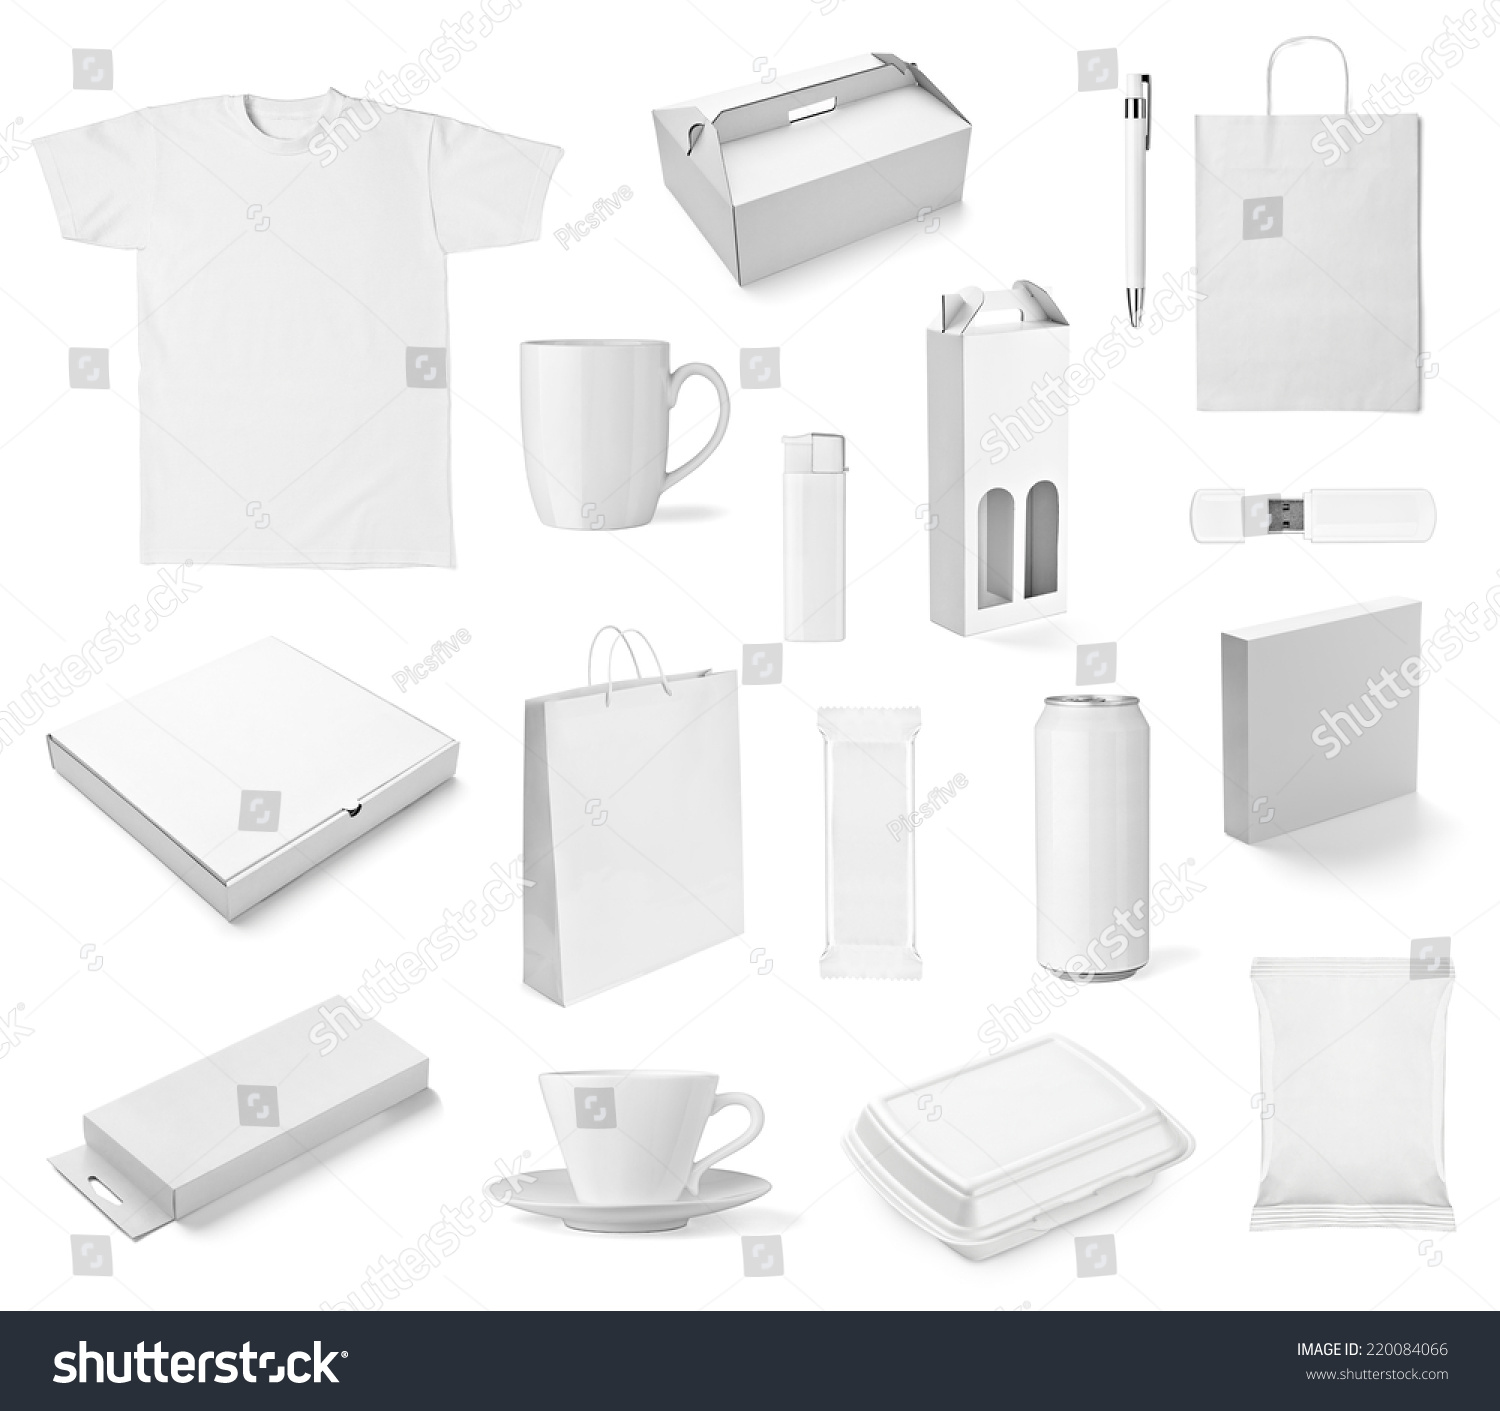 collection of  various white print templates on white background. each one is shot separately #220084066